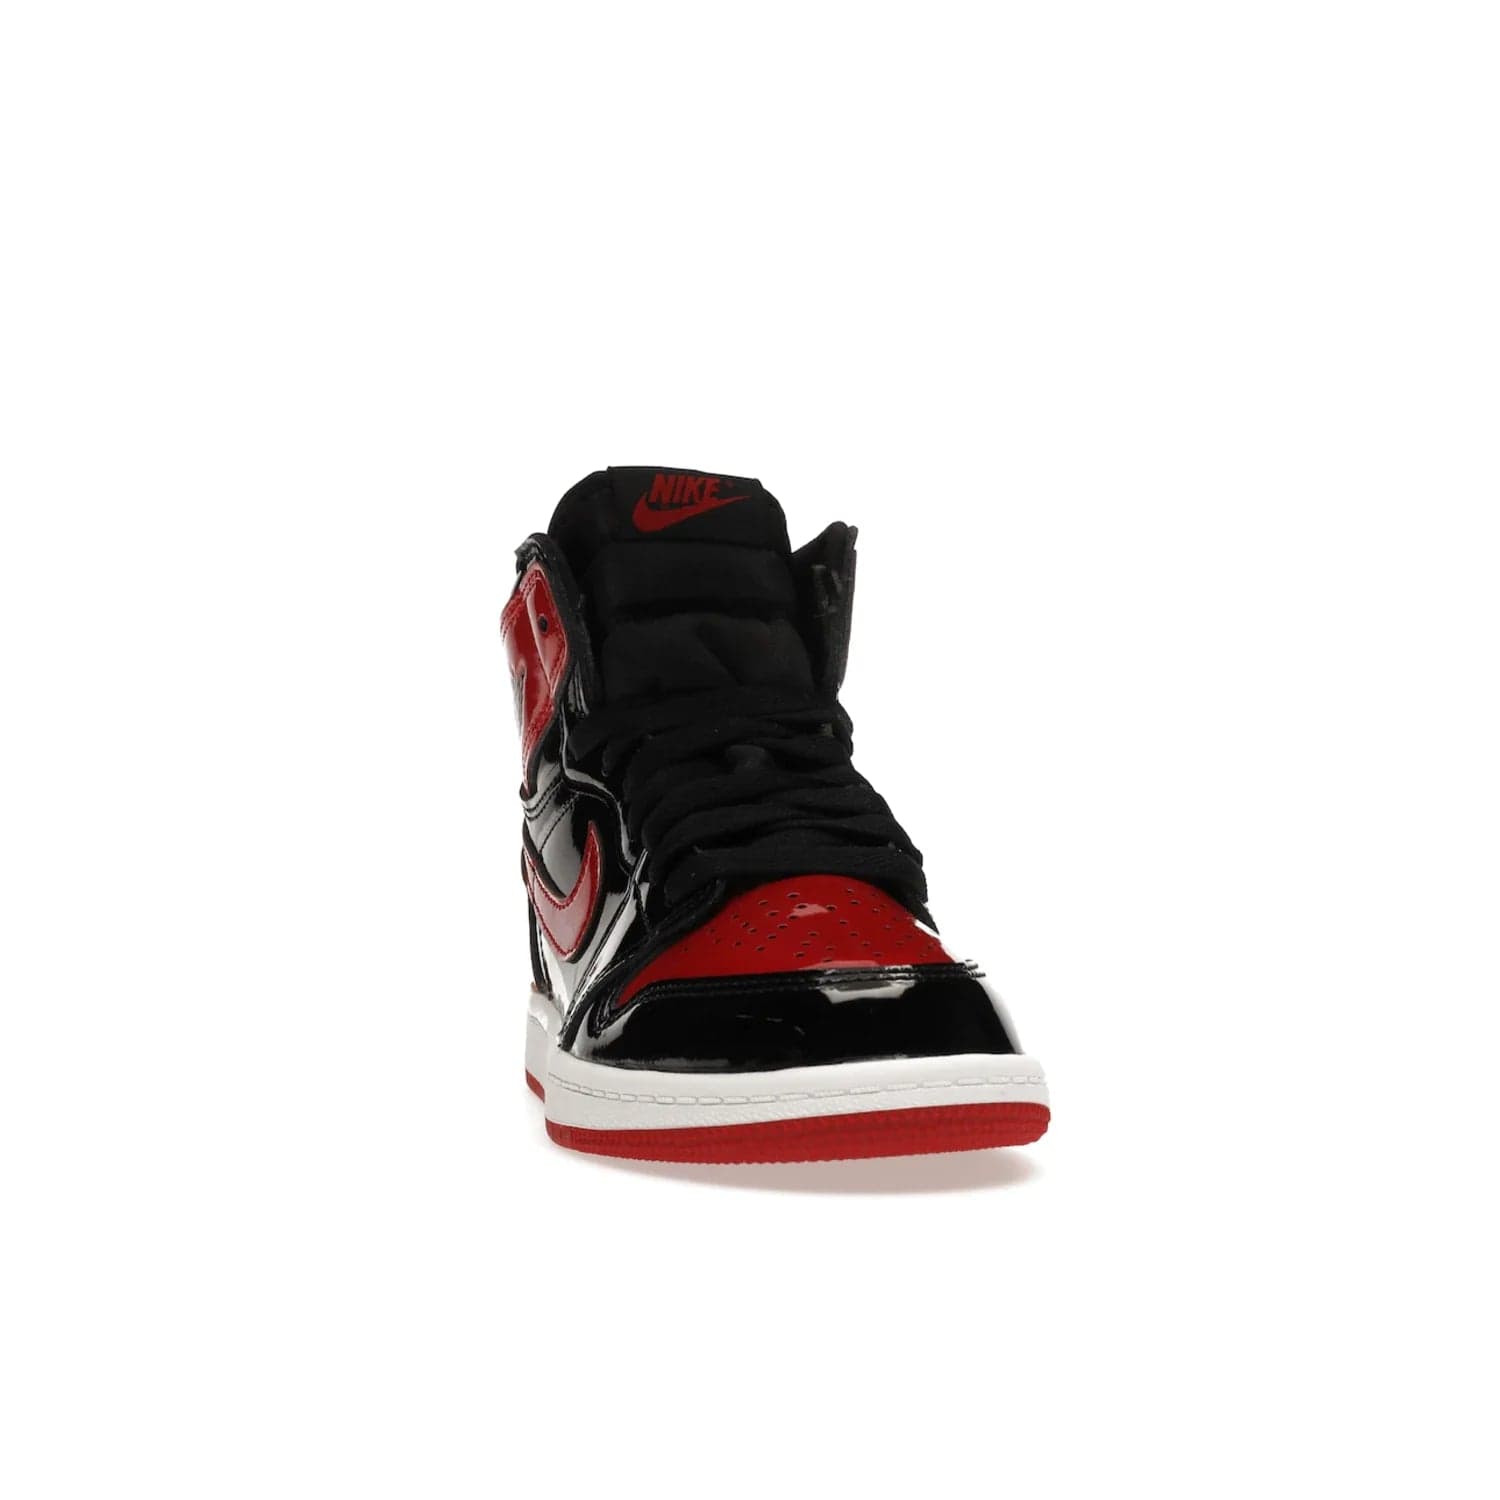 Jordan 1 Retro High OG Patent Bred (PS) - Image 9 - Only at www.BallersClubKickz.com - A timeless classic, the Air Jordan 1 Retro High OG Bred Patent PS features patent leather and debossed Air Jordan Wings motifs. Classic black, white and varsity red colourway on a comfortable and stylish sneaker. Shop this must-have now.